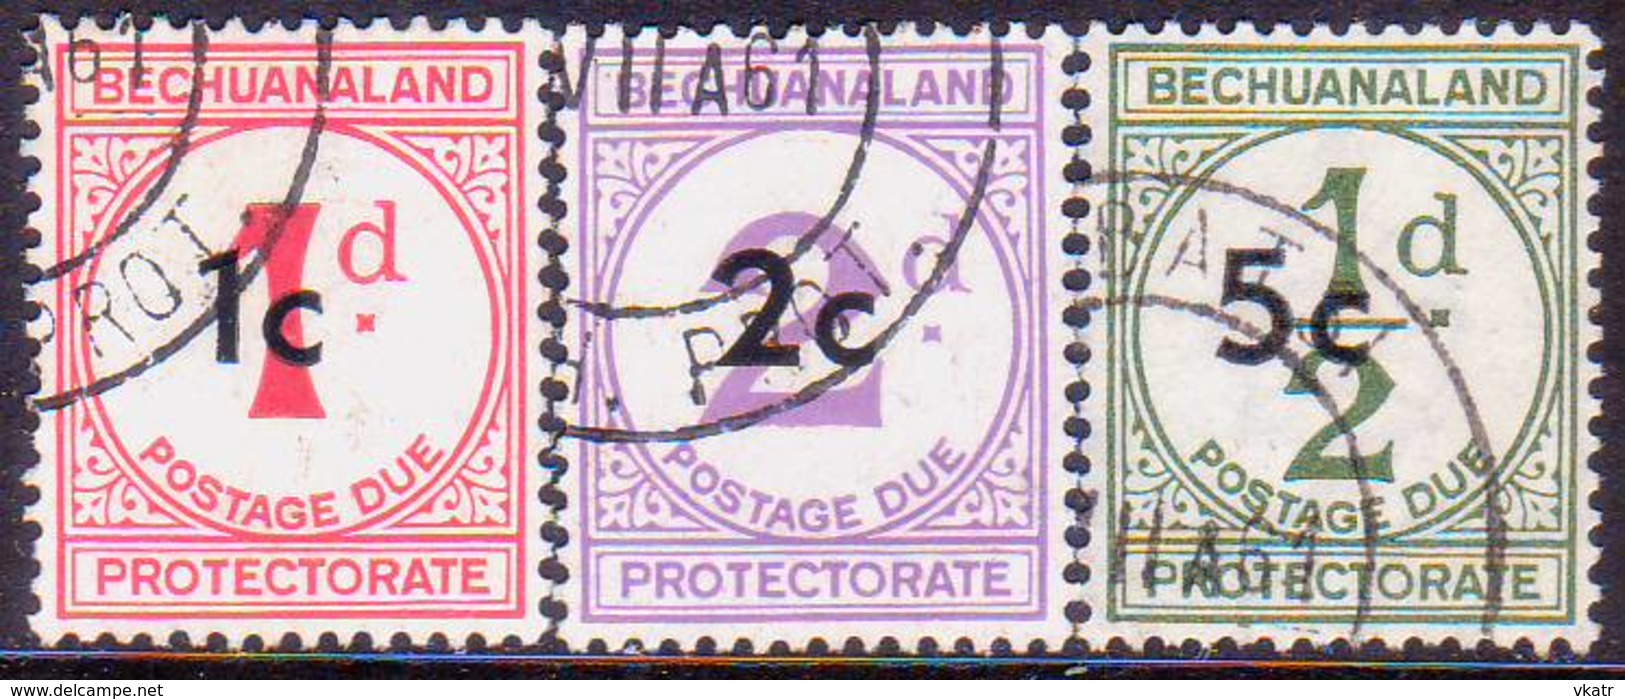 1961 BECHUANALAND Protectorate SG D7-D9 Postage Due Compl.set Used - 1885-1964 Bechuanaland Protectorate